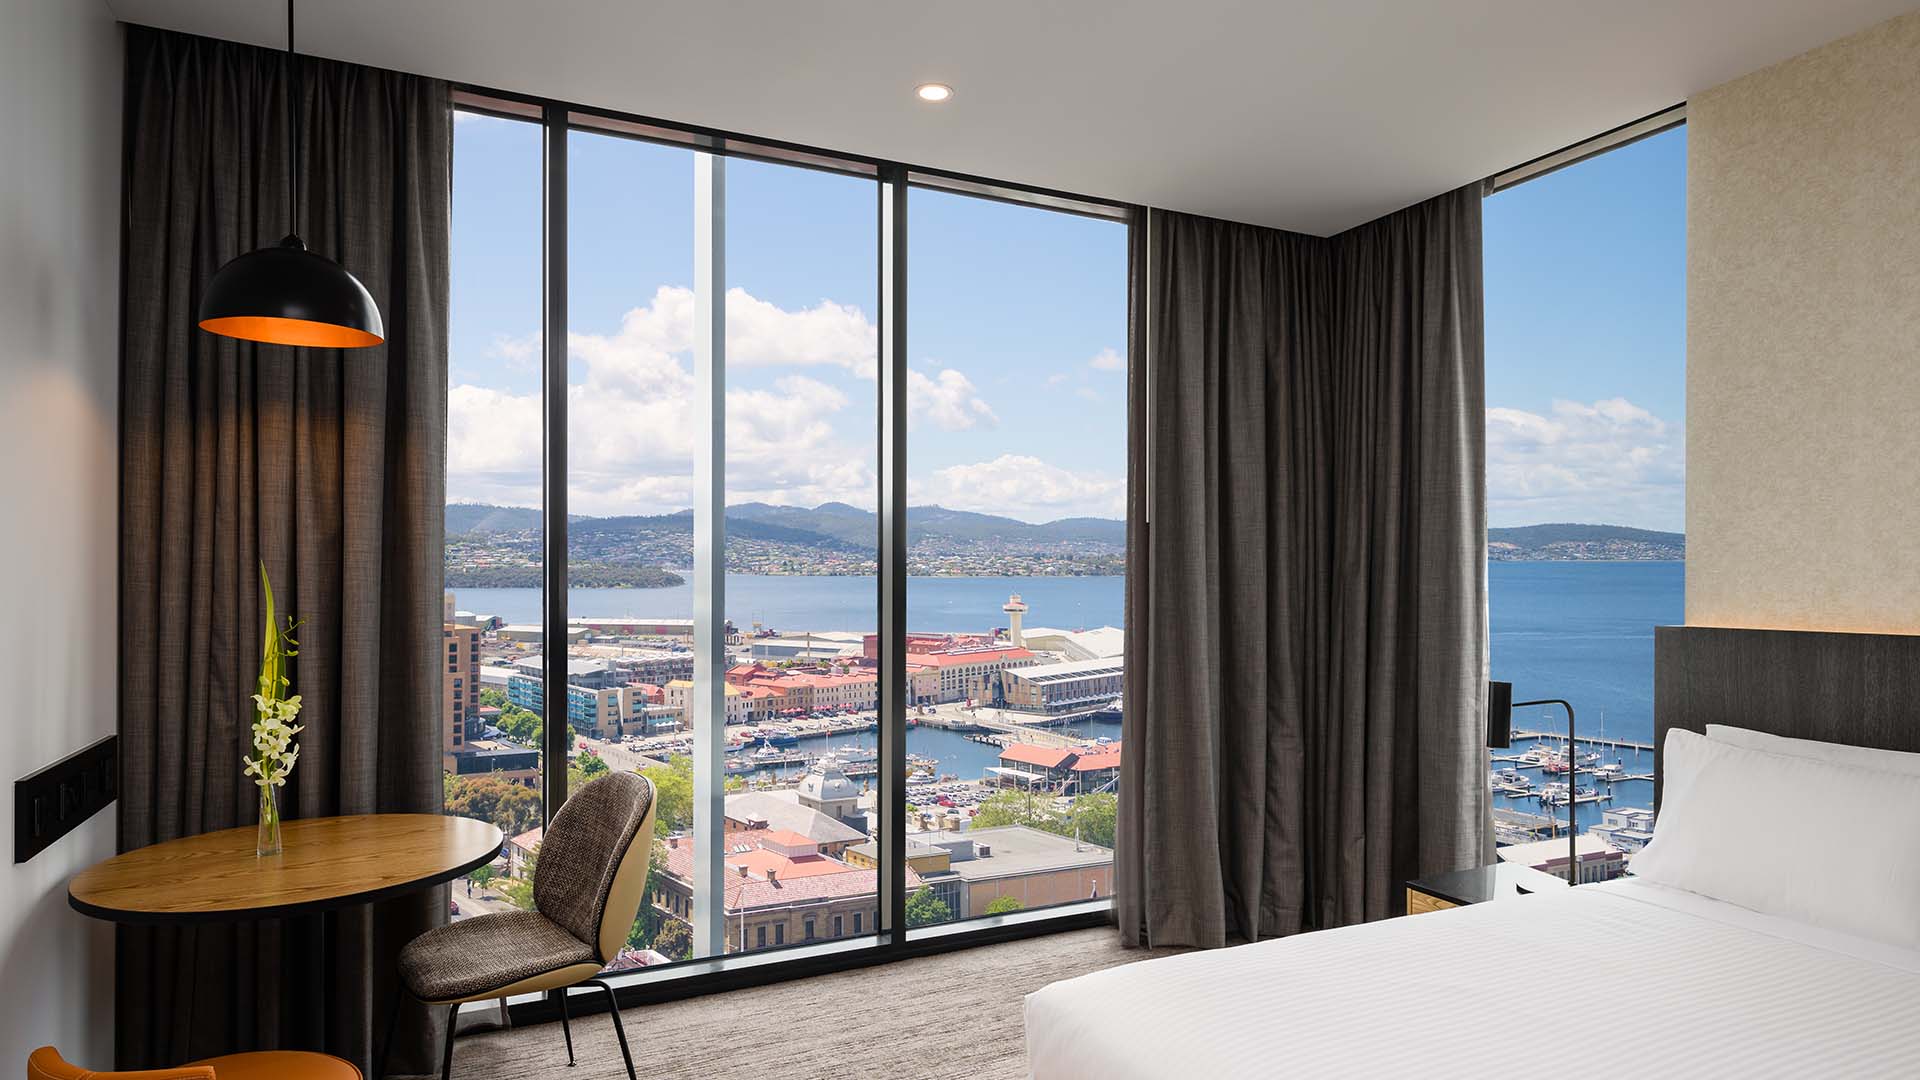 Australia's First Movenpick Hotel Has Just Opened in Hobart with a Daily Chocolate Hour